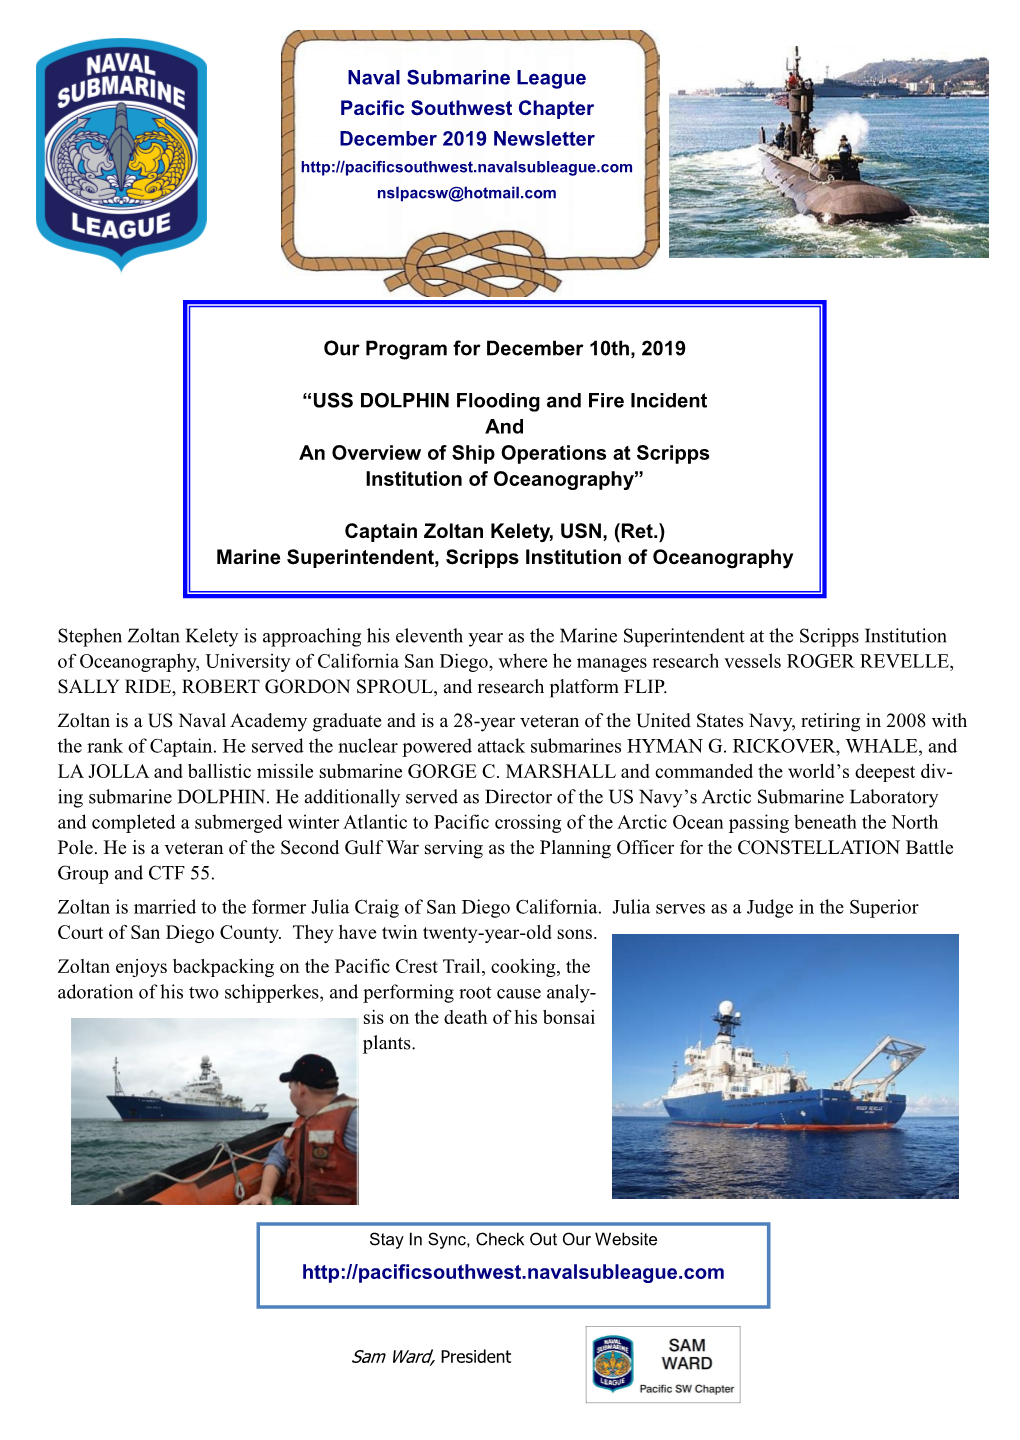 Our Program for December 10Th, 2019 “USS DOLPHIN Flooding and Fire